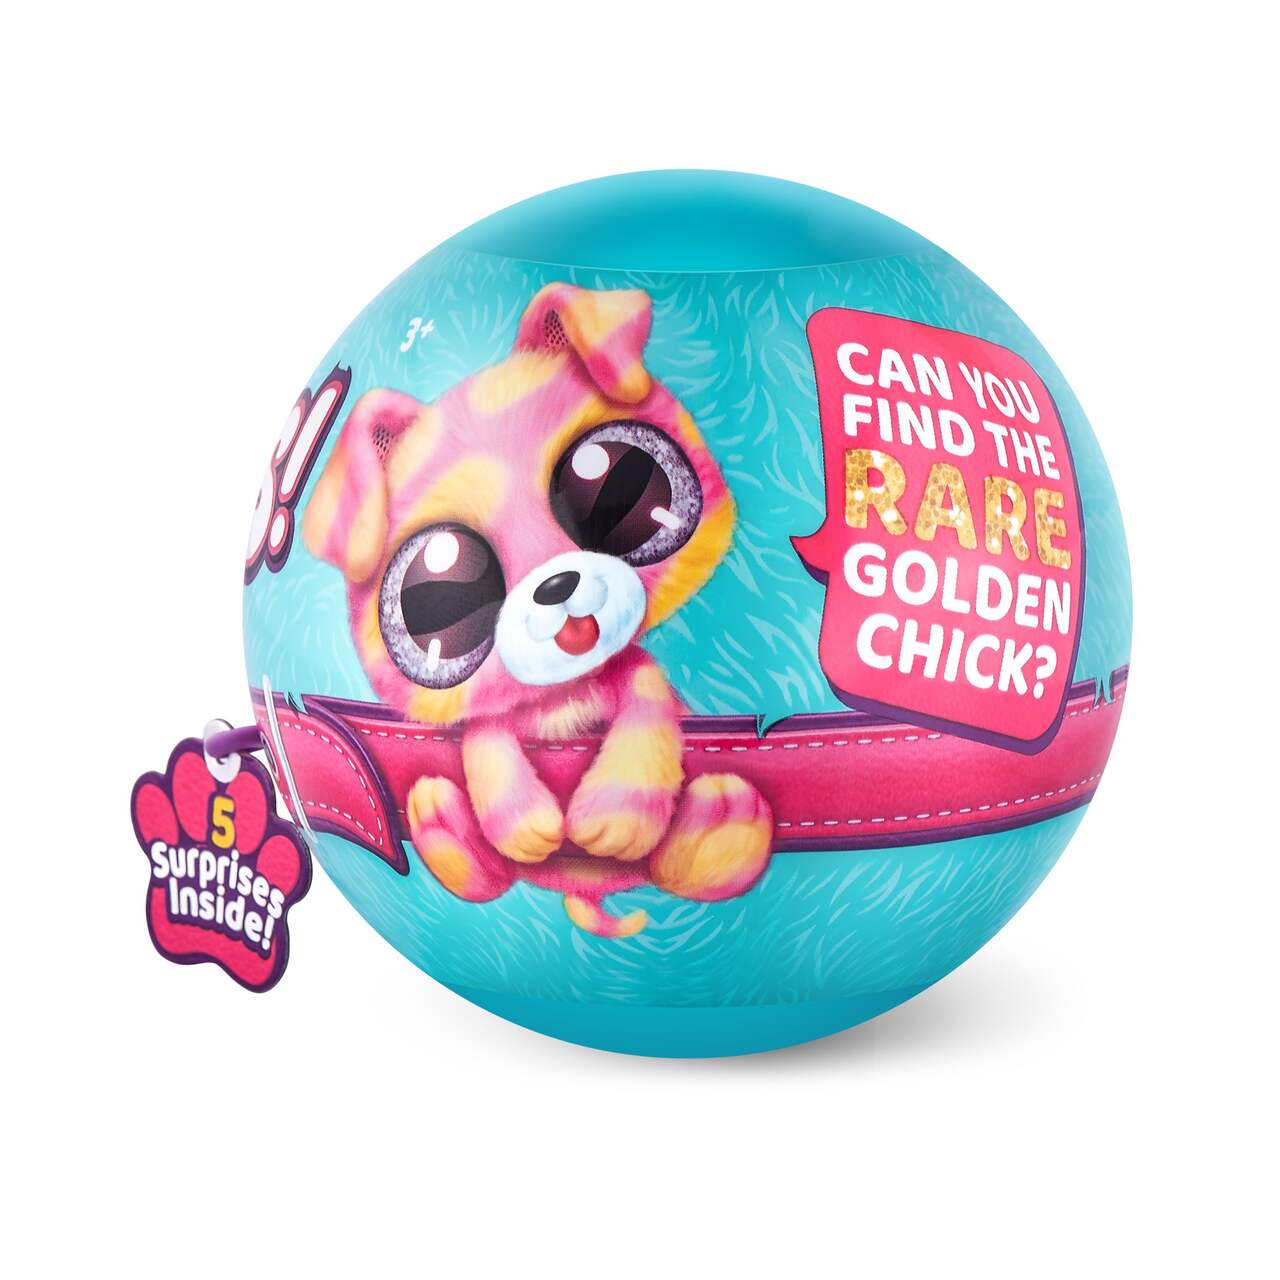 https://media-www.canadiantire.ca/product/seasonal-gardening/toys/toys-games/0509785/5-surprise-plushy-pets-03199717-3ad8-4f7d-a7a9-8ef3f6440a79-jpgrendition.jpg?imdensity=1&imwidth=640&impolicy=mZoom